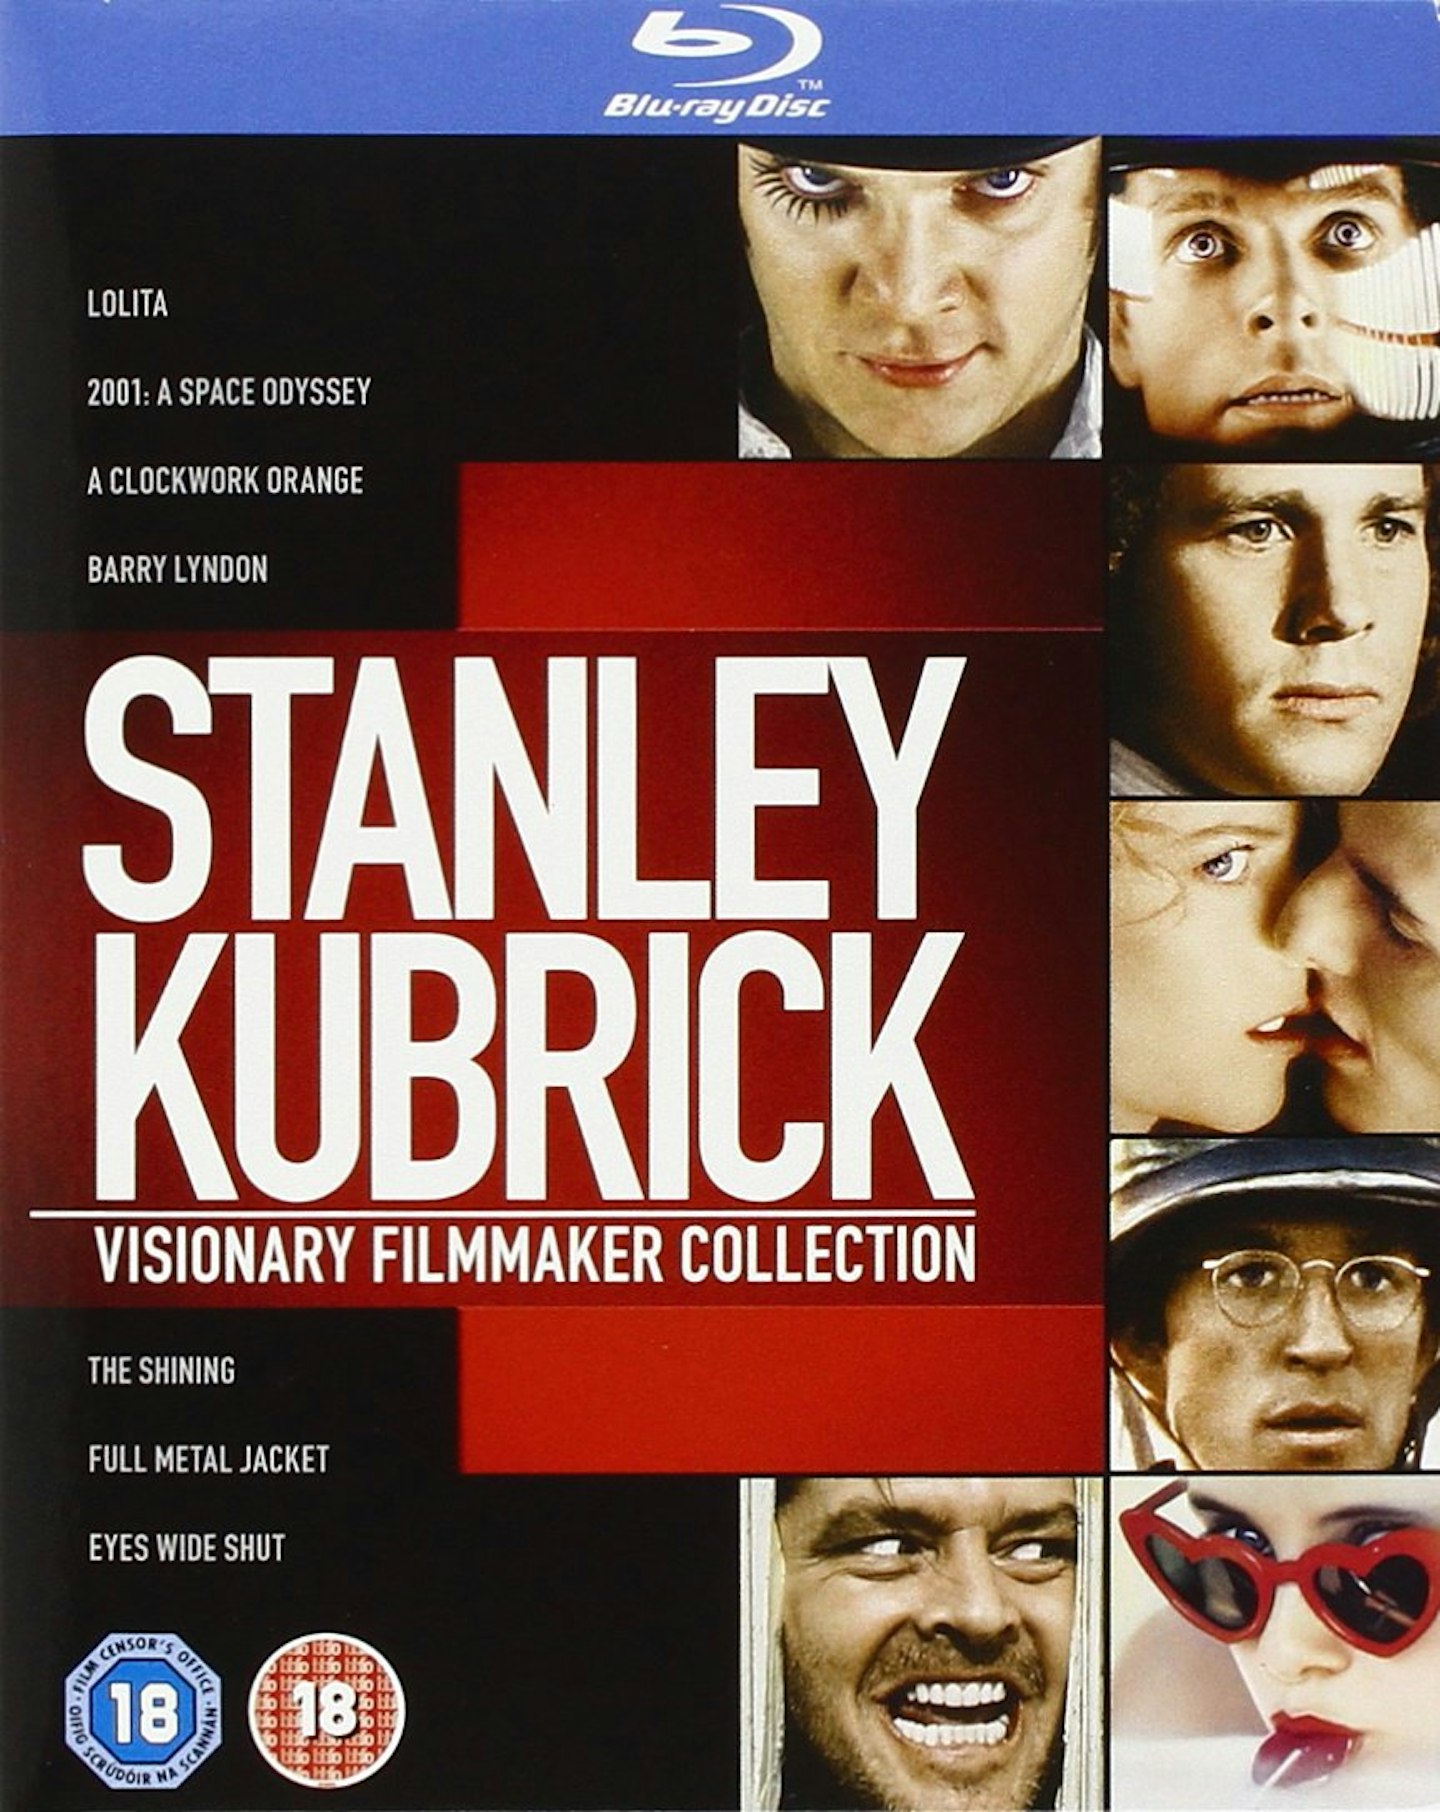 Stanley Kubrick: Visionary Filmmaker Collection, Blu-ray